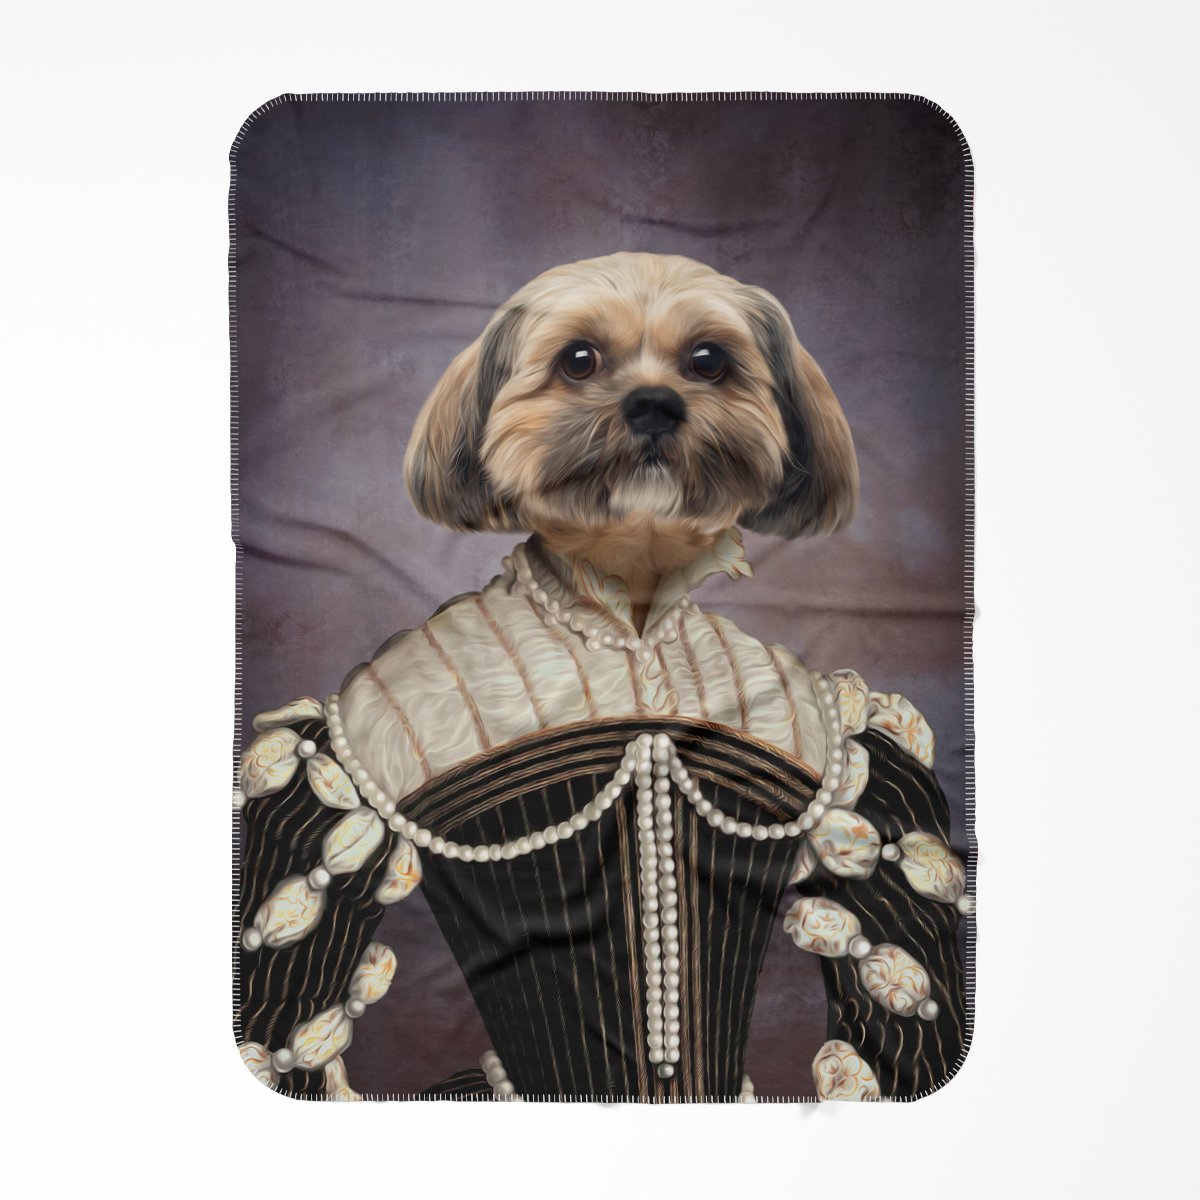 The Marquise: Custom Pet Blanket - Paw & Glory - #pet portraits# - #dog portraits# - #pet portraits uk#Paw and glory, Pet portraits blanket,custom pet painting, personalized cat blanket, blanket with dogs face, pet portrait gifts, personalised dog blanket